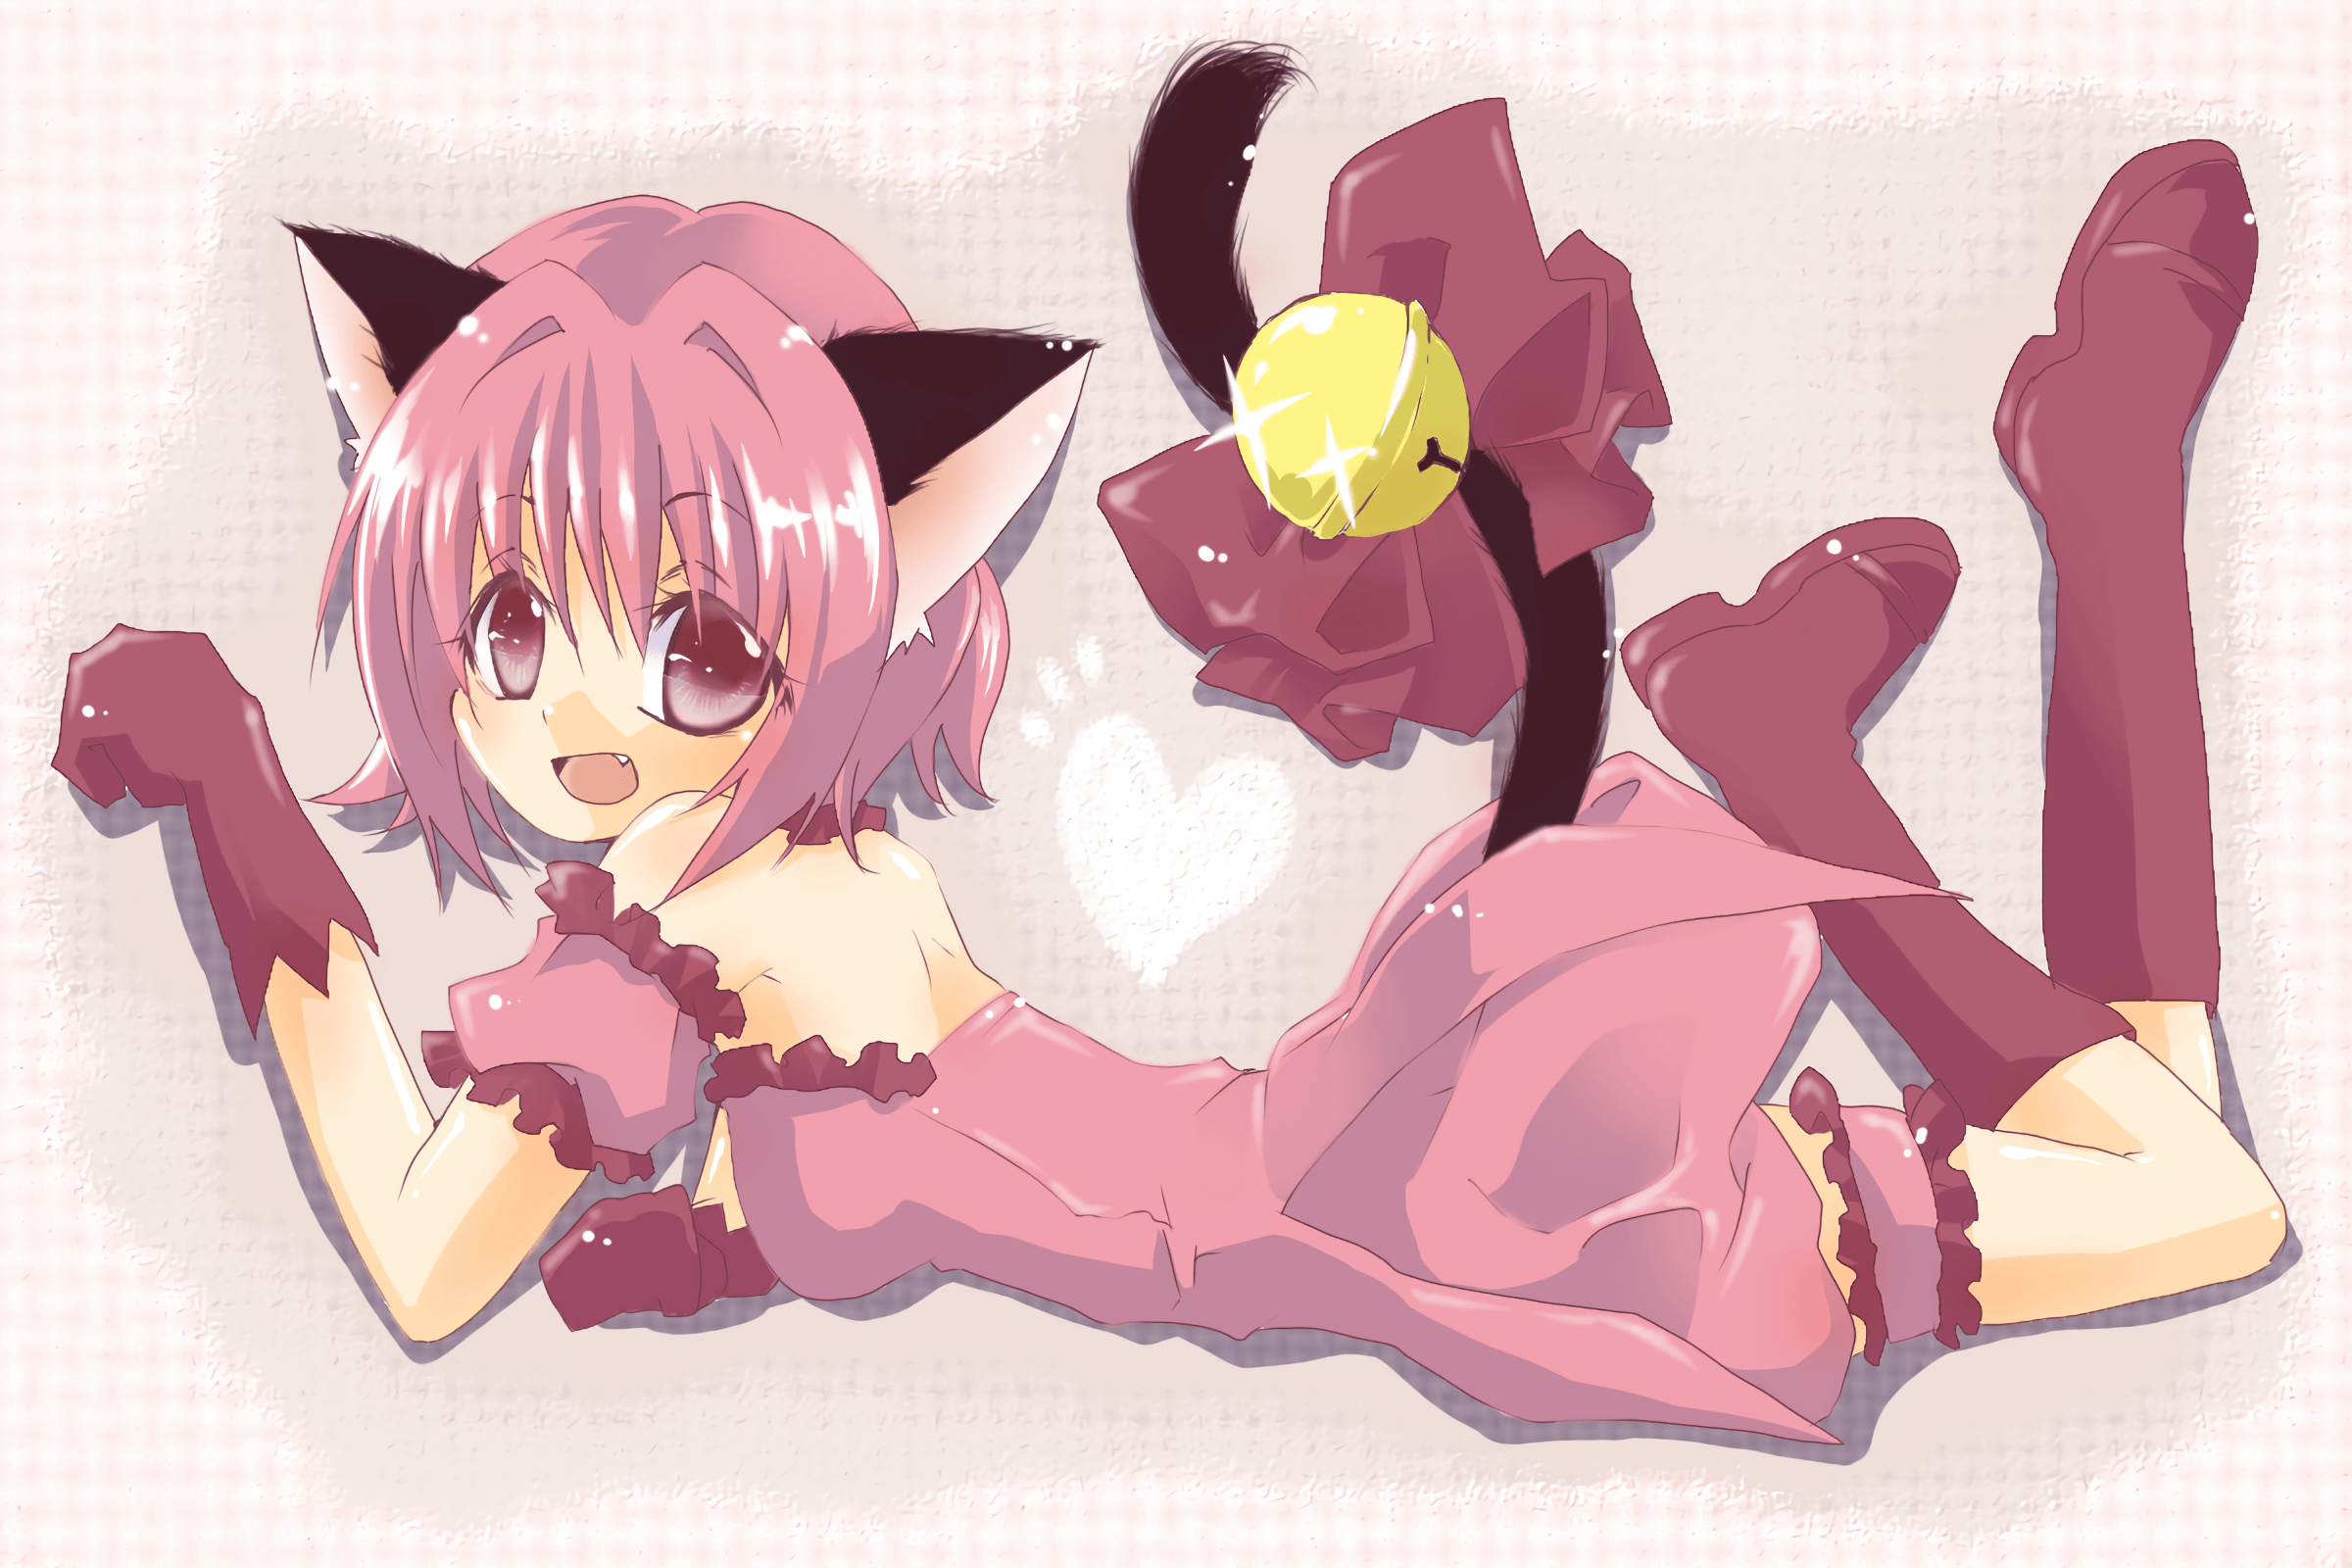 Tokyo Mew Mew Full HD Wallpapers and Backgrounds Image.